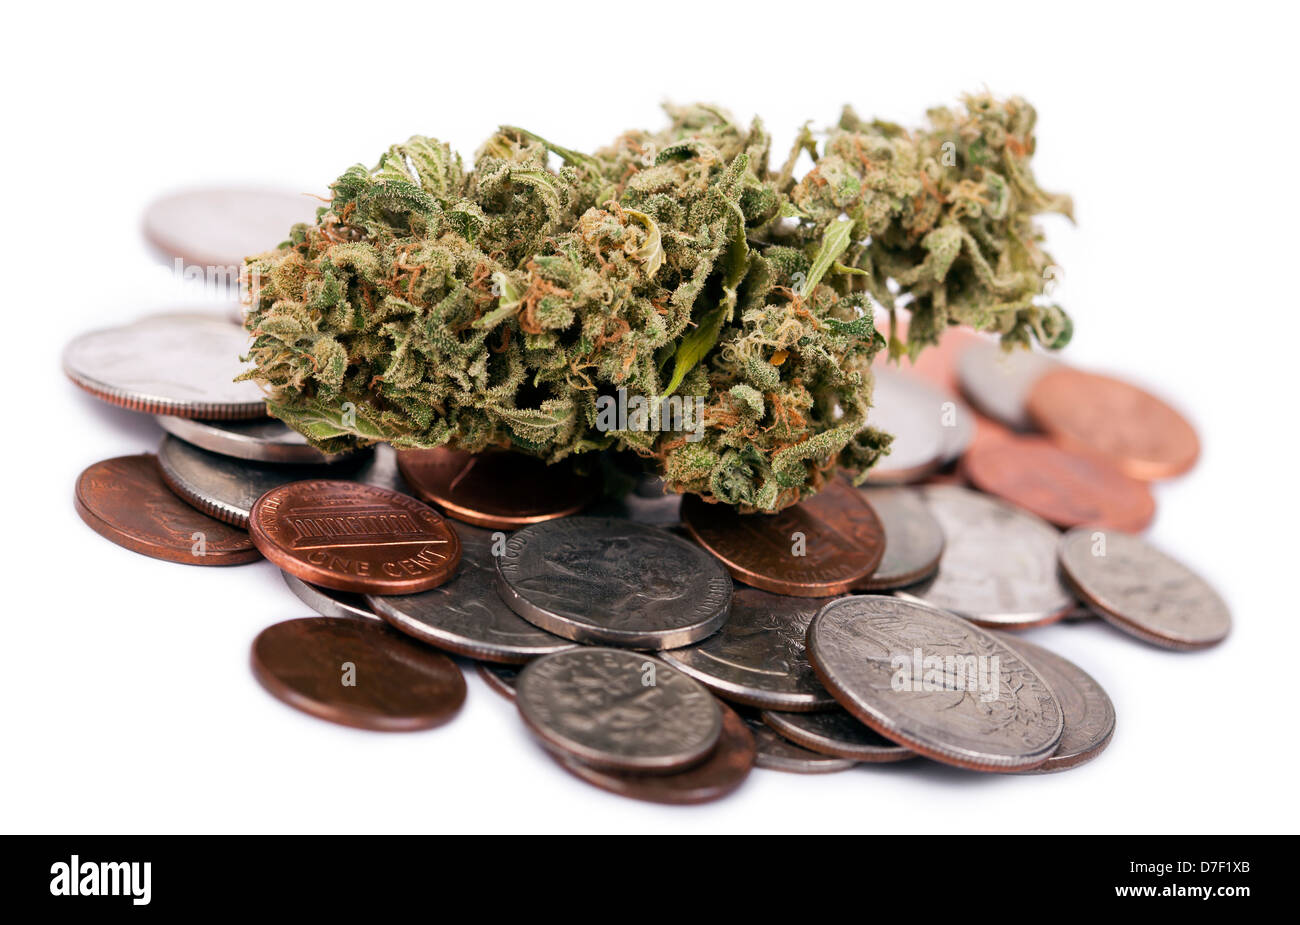 A high grade hydrophonic Cannabis (Marijuana) bud resting on pile various USA coins - pennies quarters dimes nickels. White Stock Photo